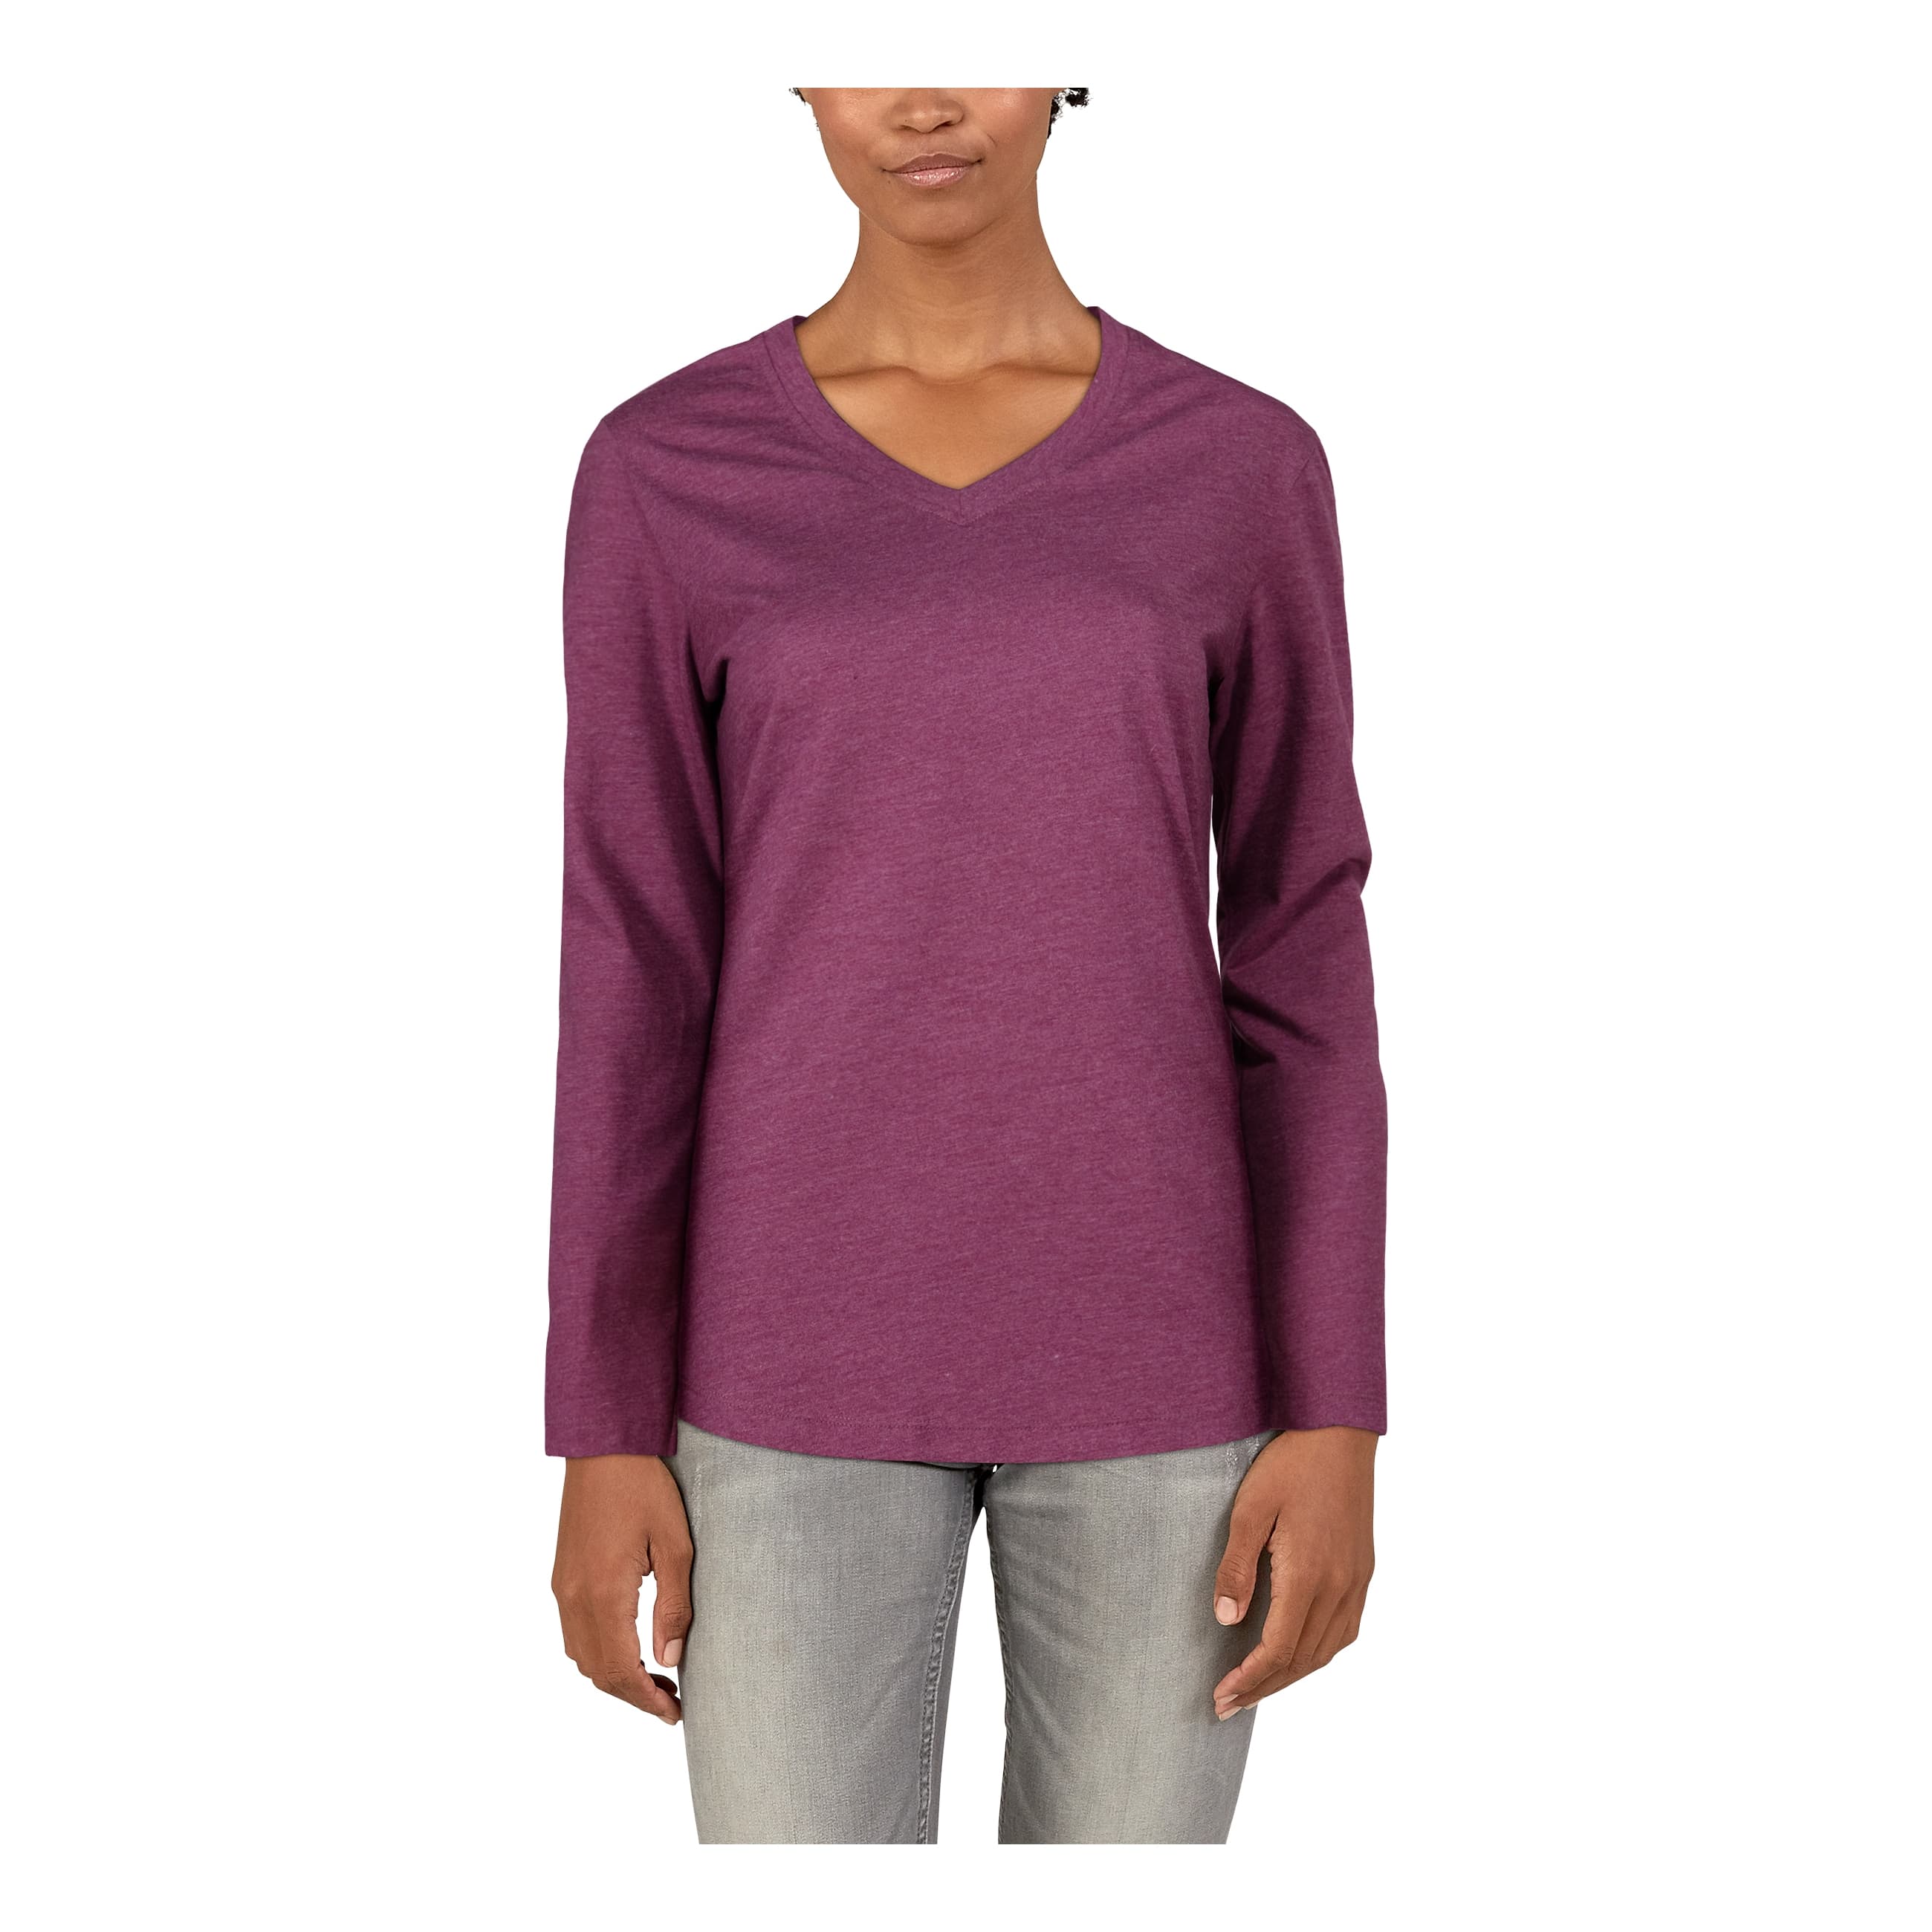 Natural Reflections® Women’s Essential V-Neck T-Shirt - Prune